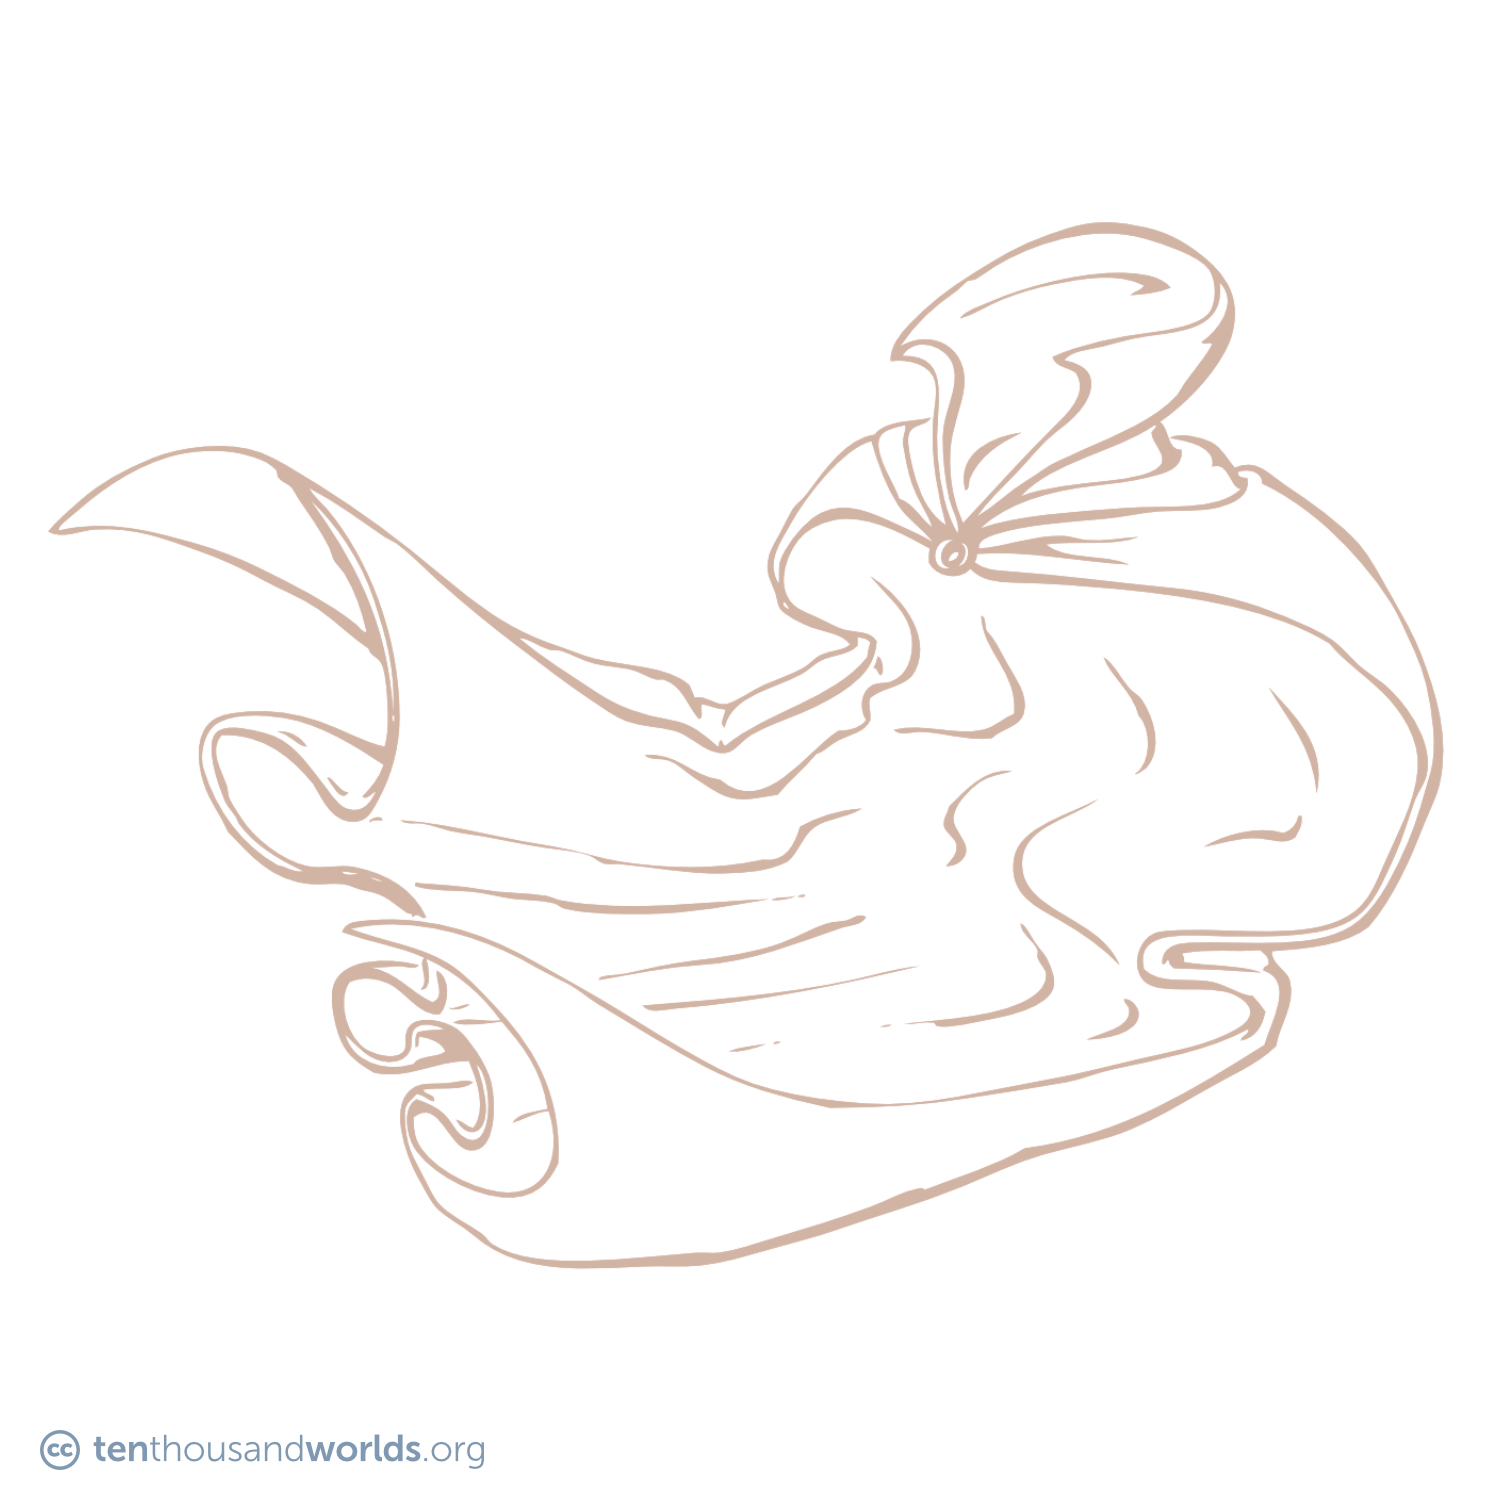 A pencil sketch of a voluminous fluttering cloak with a large popped collar.